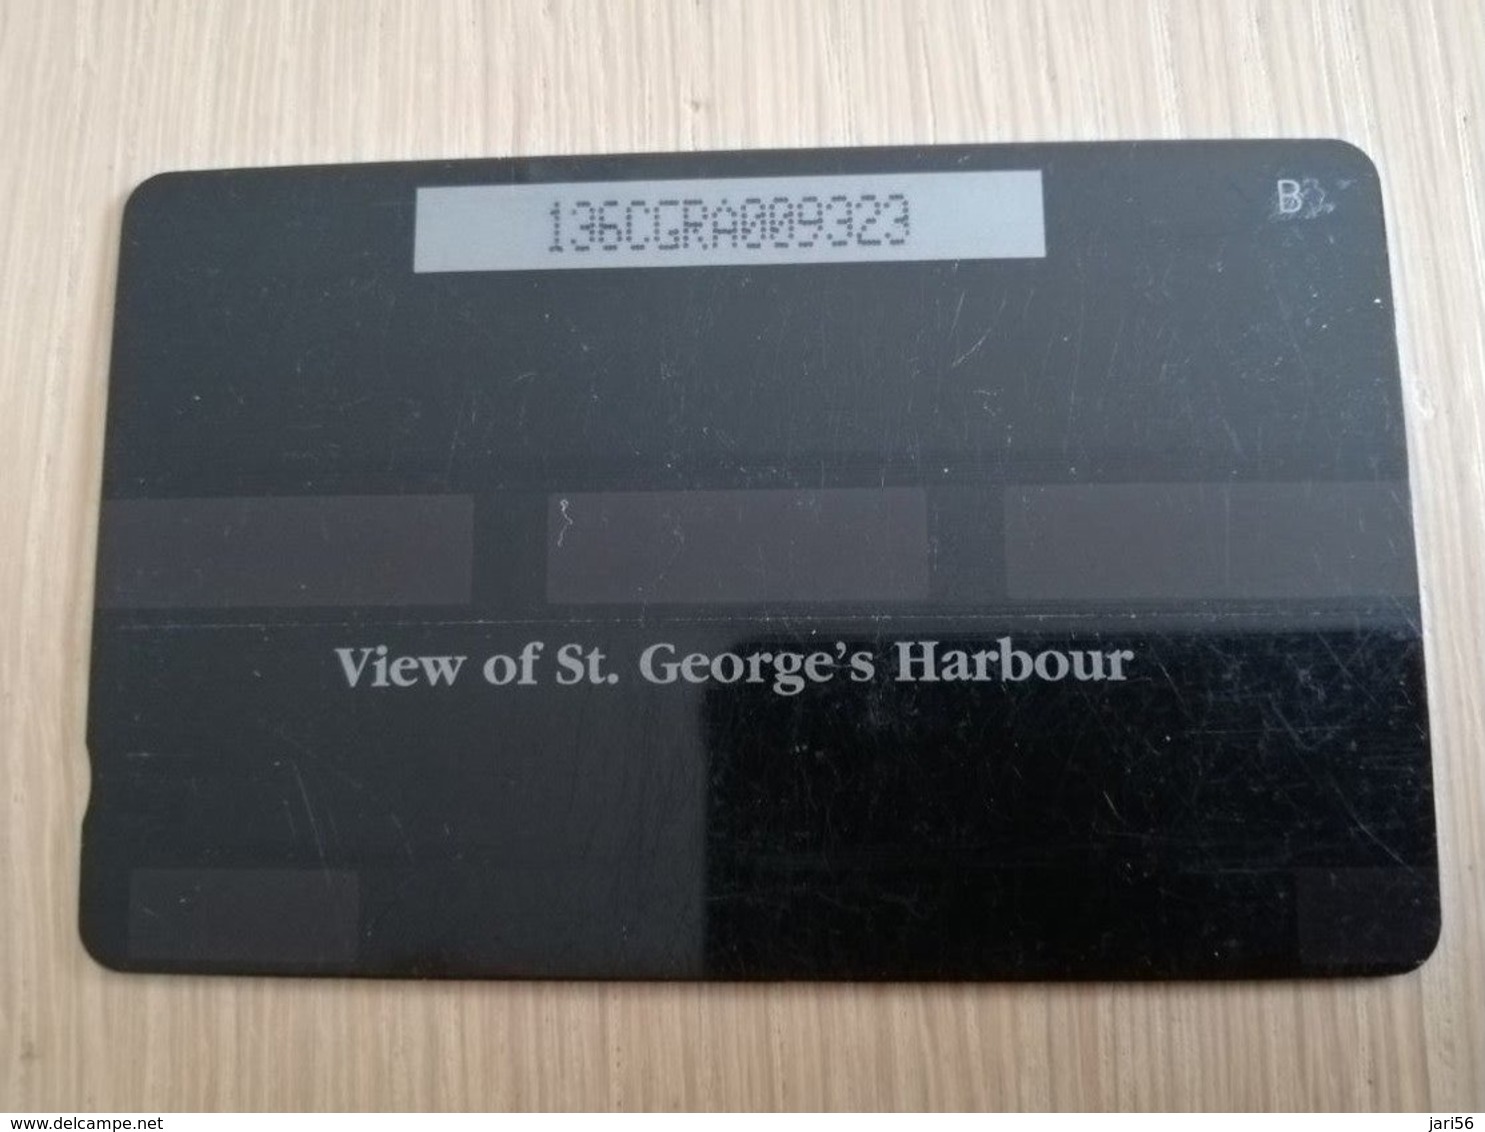 GRENADA  $ 10,- GPT GRE-136CGRA  VIEW OF ST GEORGES HARBOUR     MAGNETIC    Fine Used Card    **2268** - Grenada